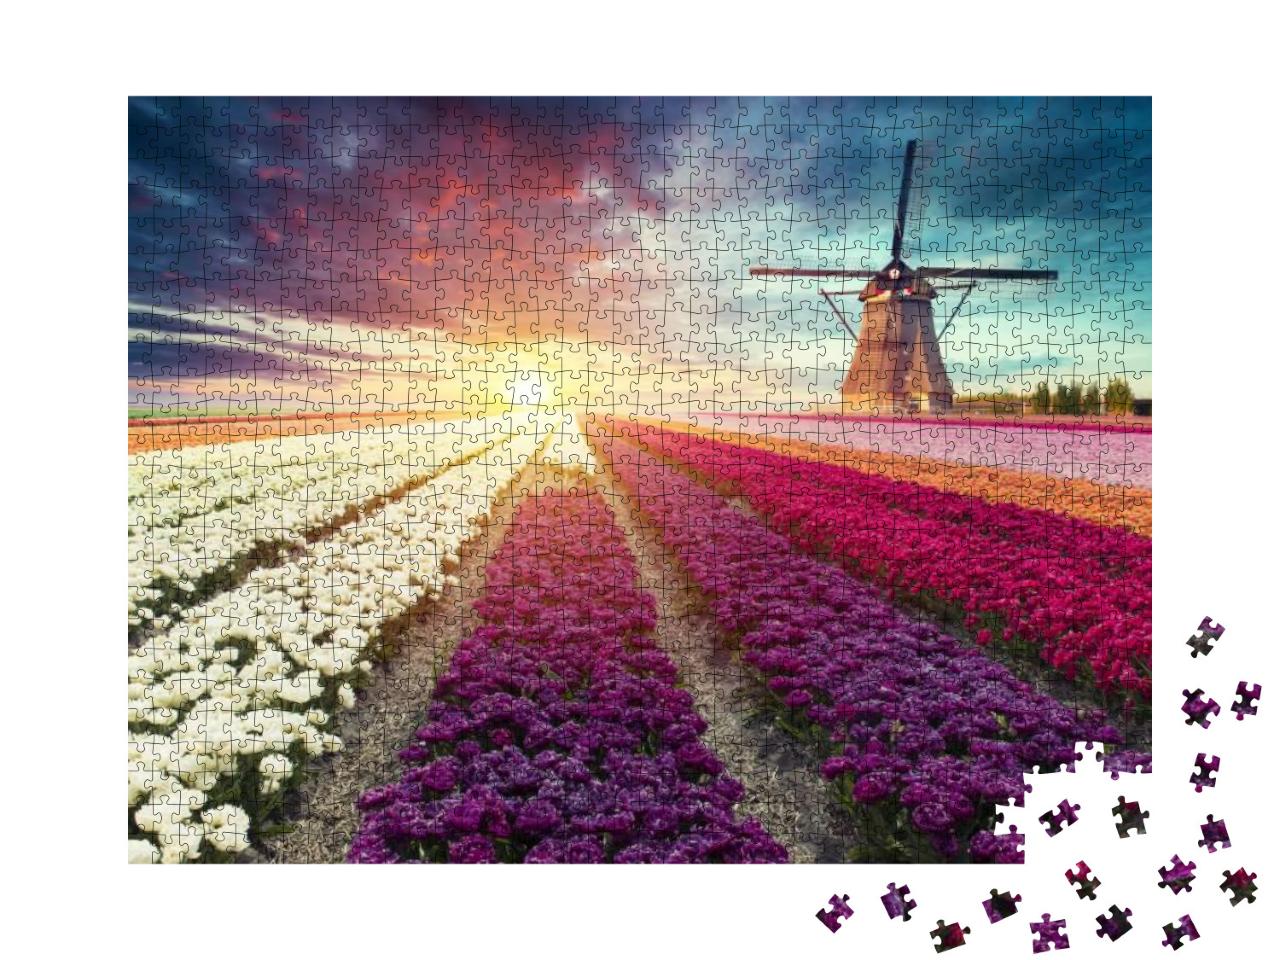 Traditional Netherlands Holland Dutch Scenery with One Ty... Jigsaw Puzzle with 1000 pieces